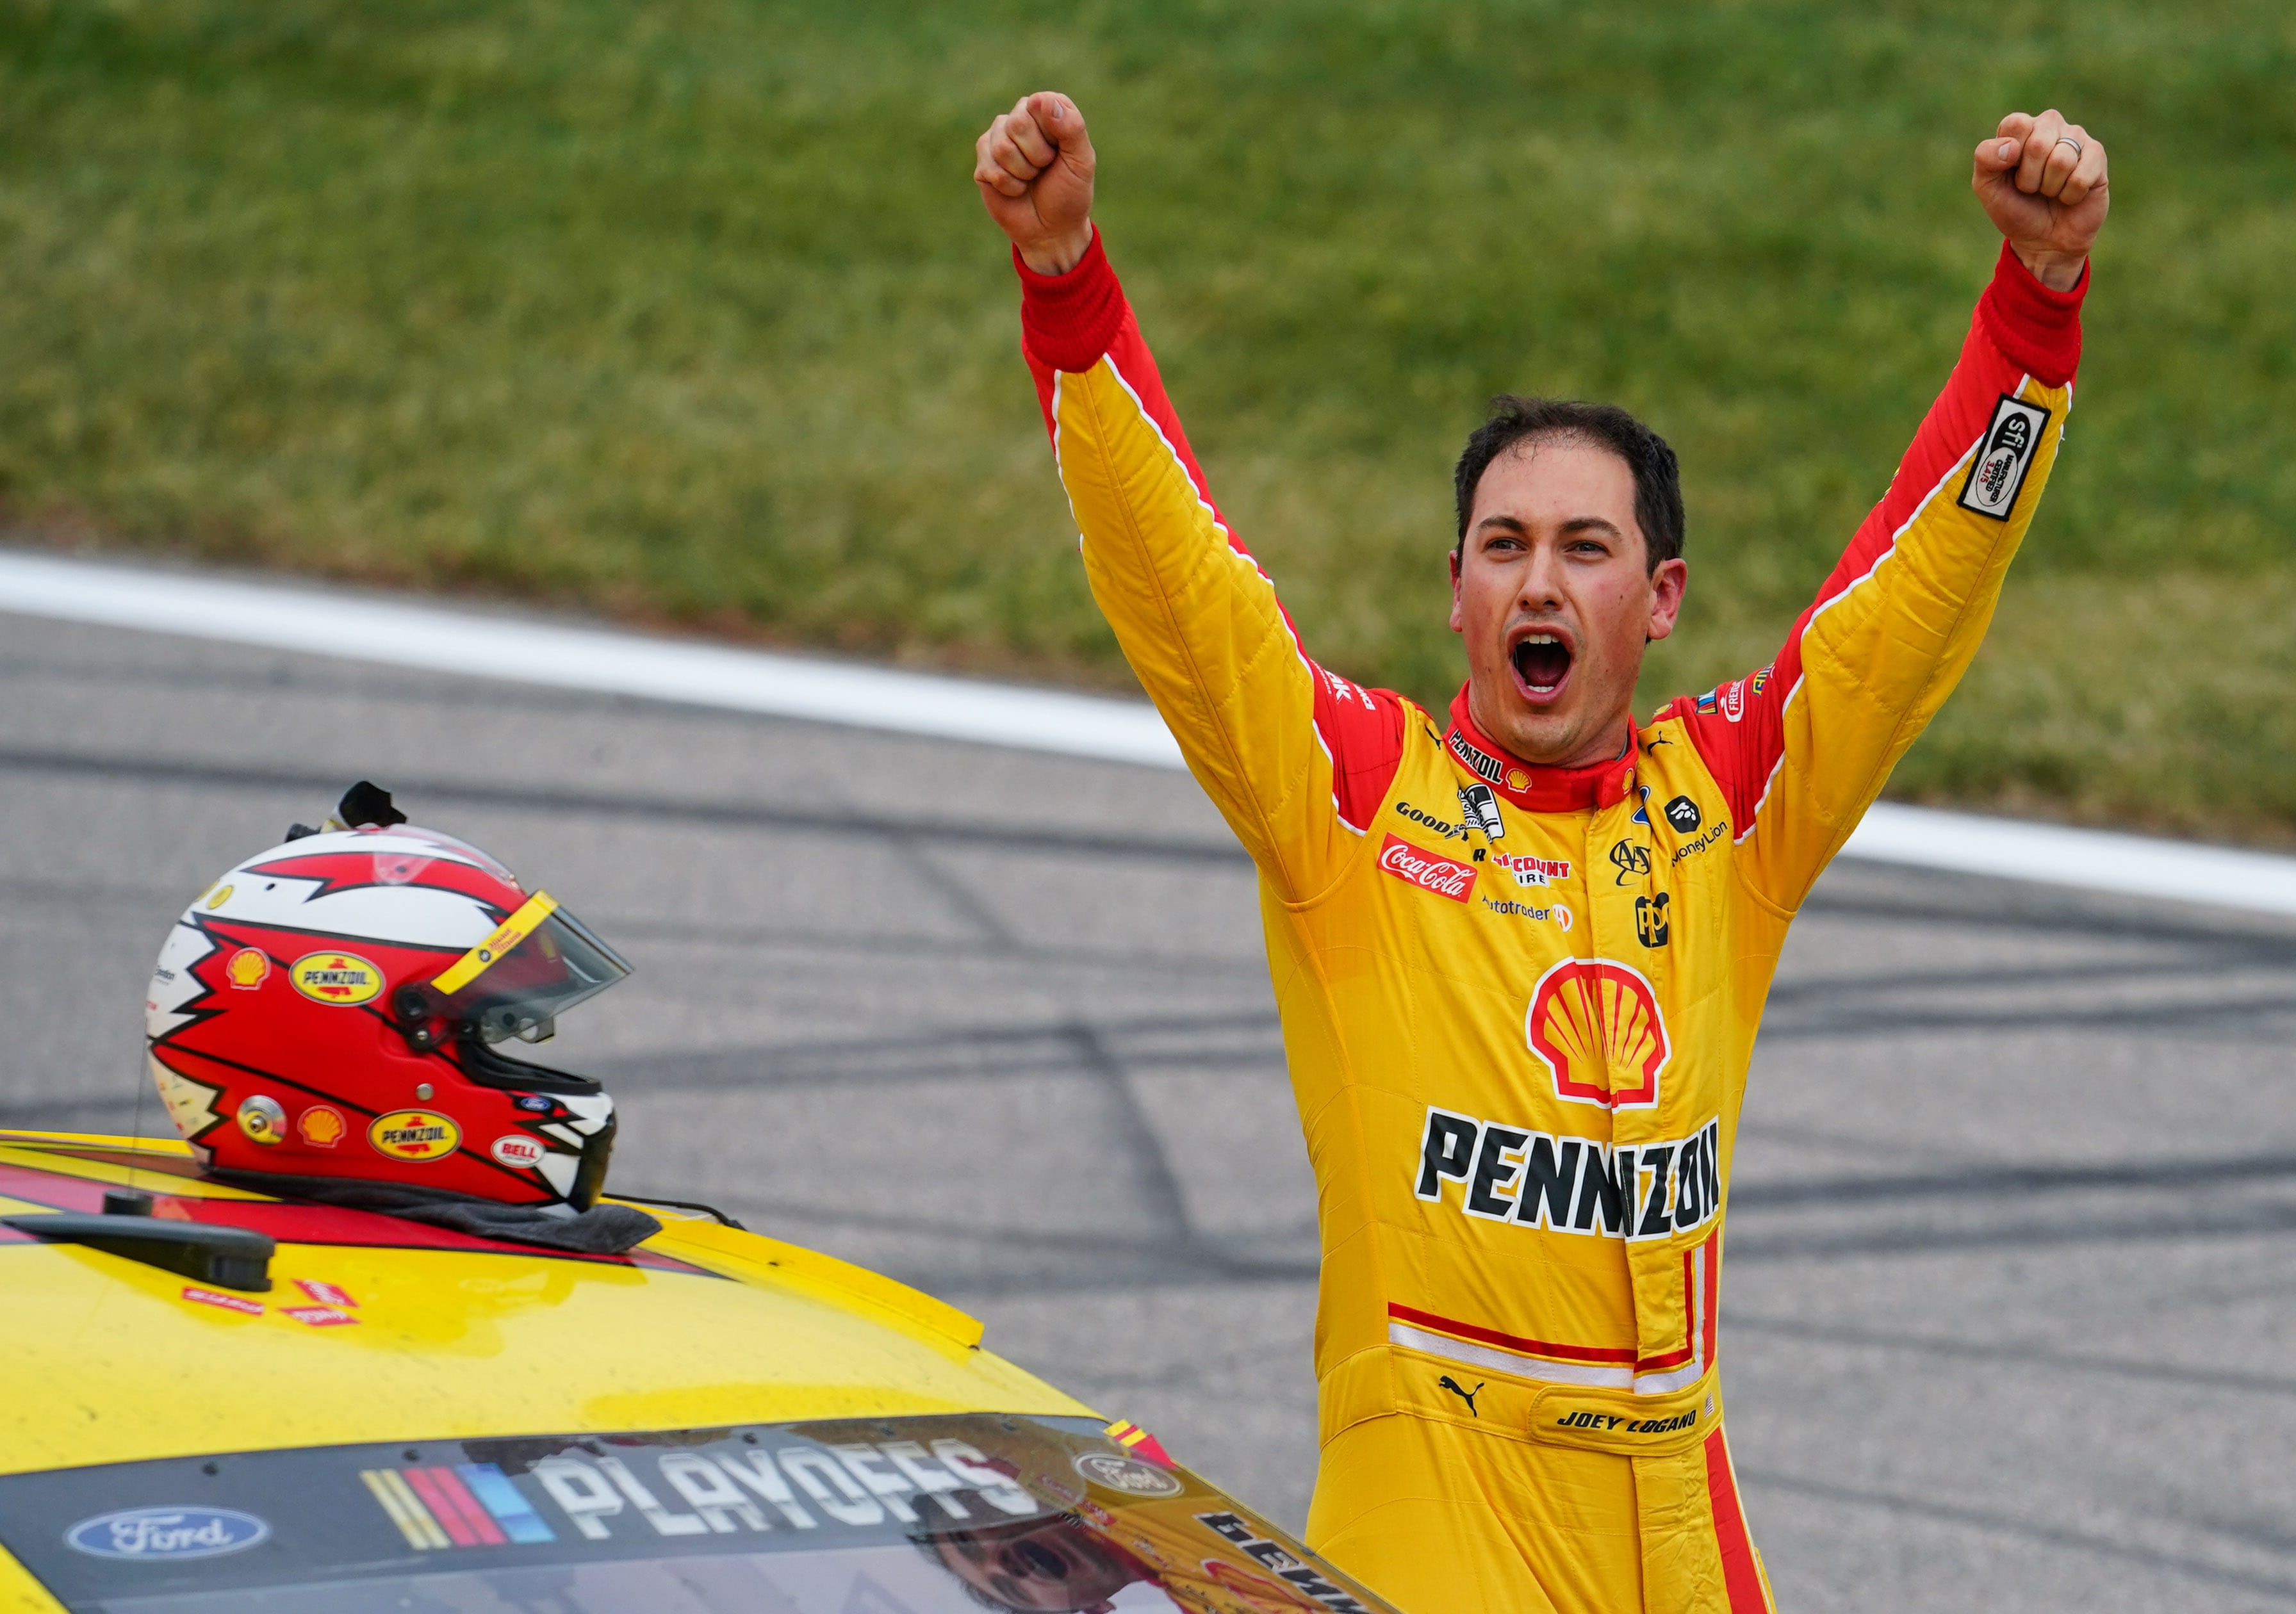 Pit road victory allows Joey Logano to advance to NASCAR's final four